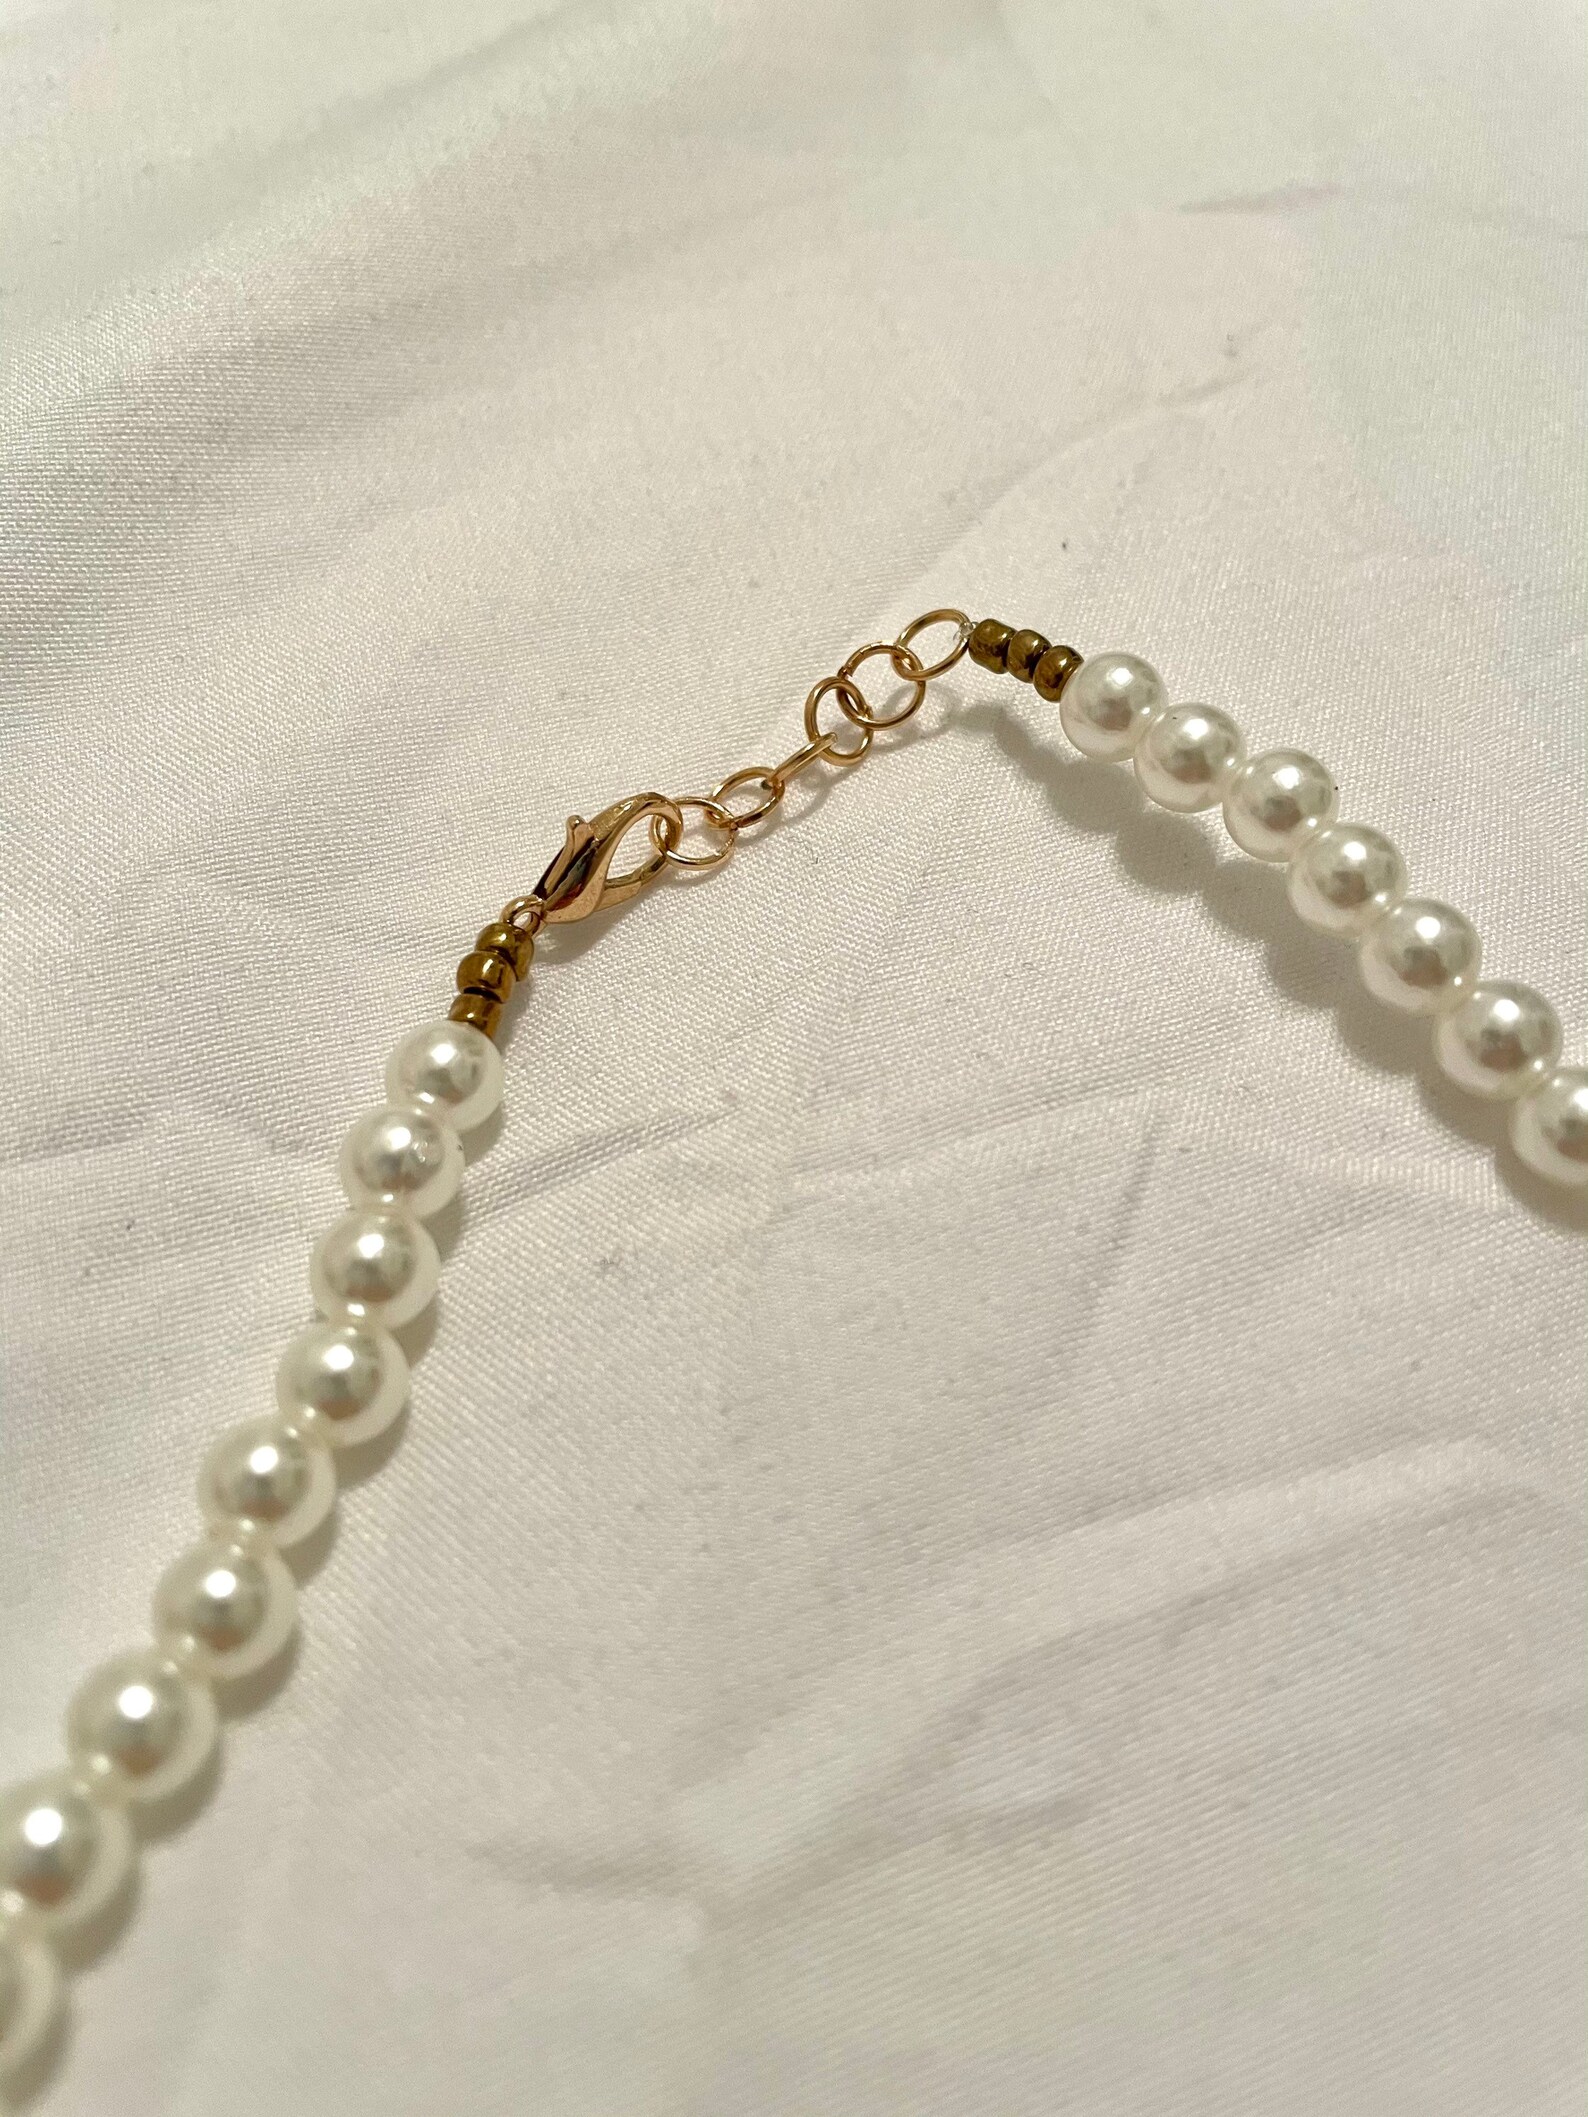 Pearl Necklace Dainty Jewelry Pearl Jewelry | Etsy